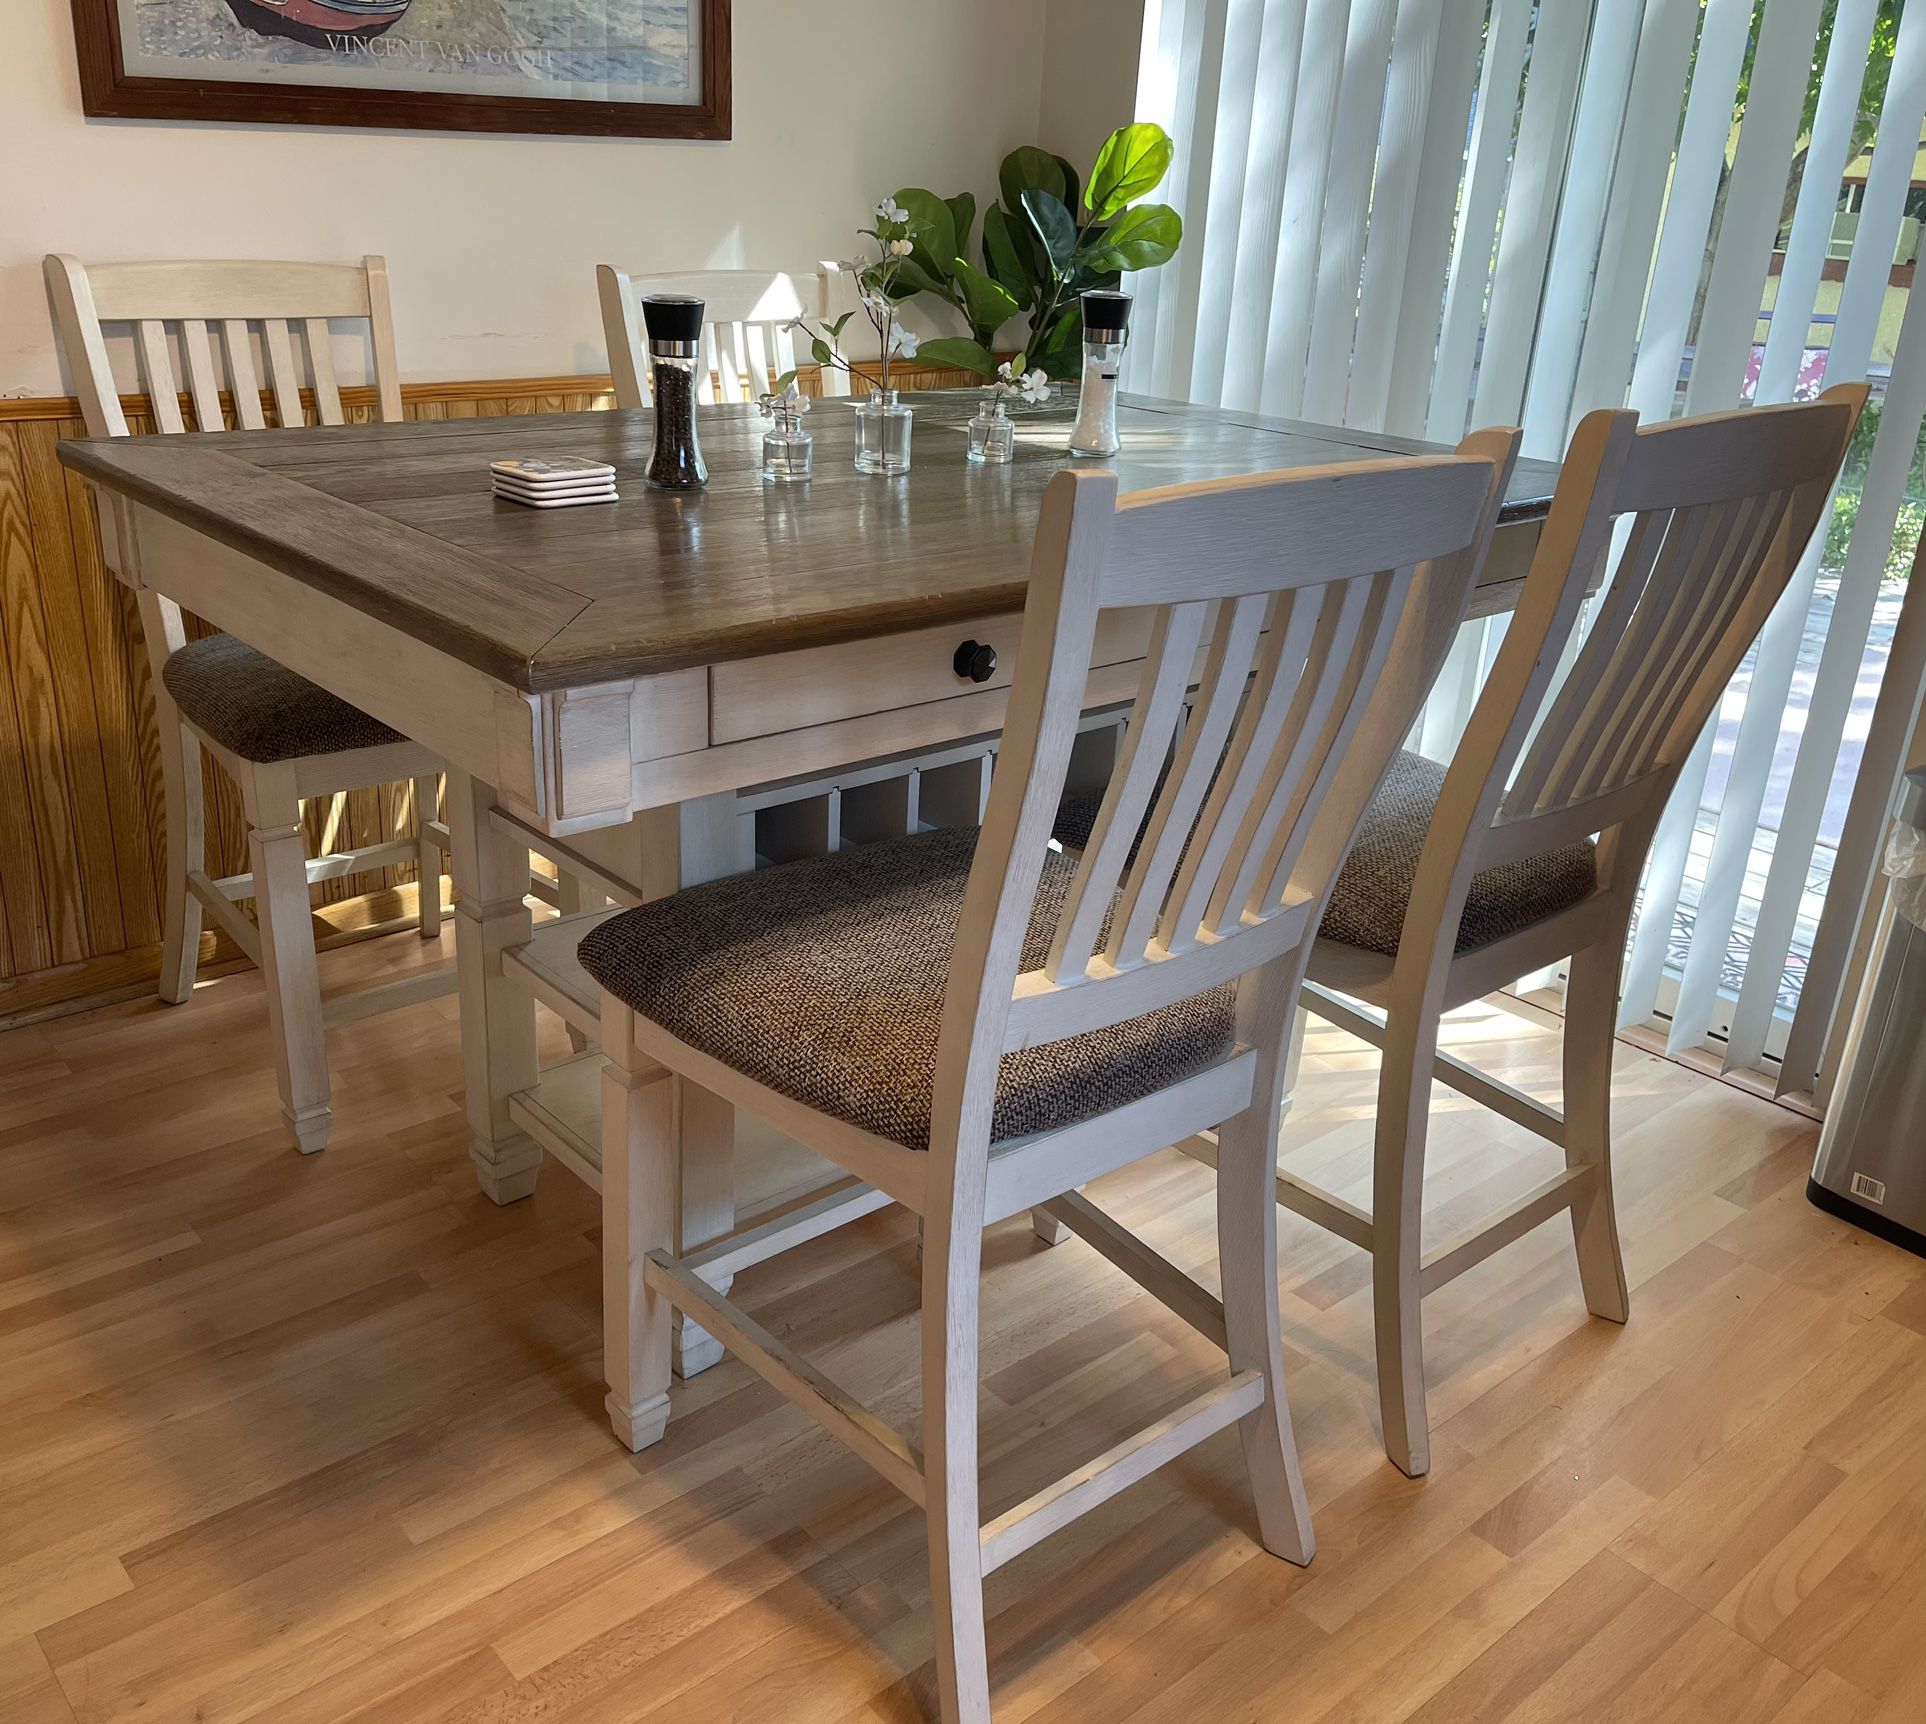 Kitchen Dining Table With Wine Storage, Drawers, And Chairs